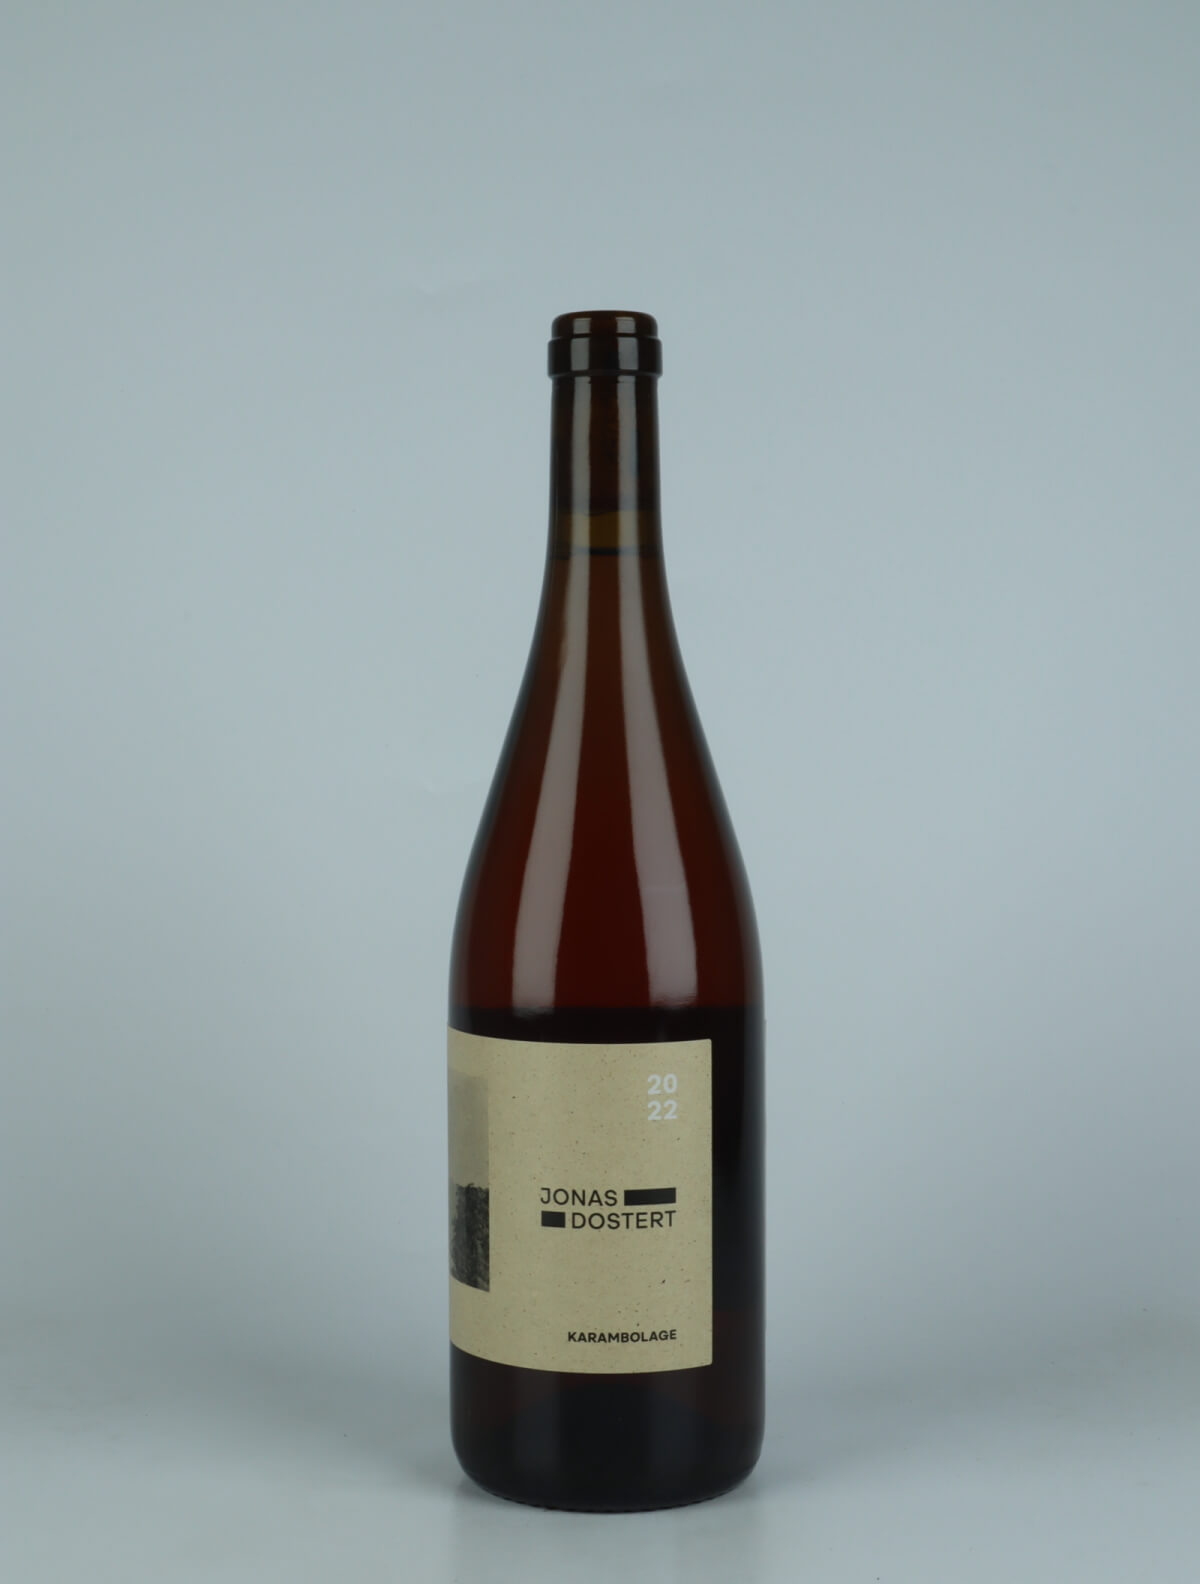 A bottle 2022 Karambolage Orange wine from Jonas Dostert, Mosel in Germany